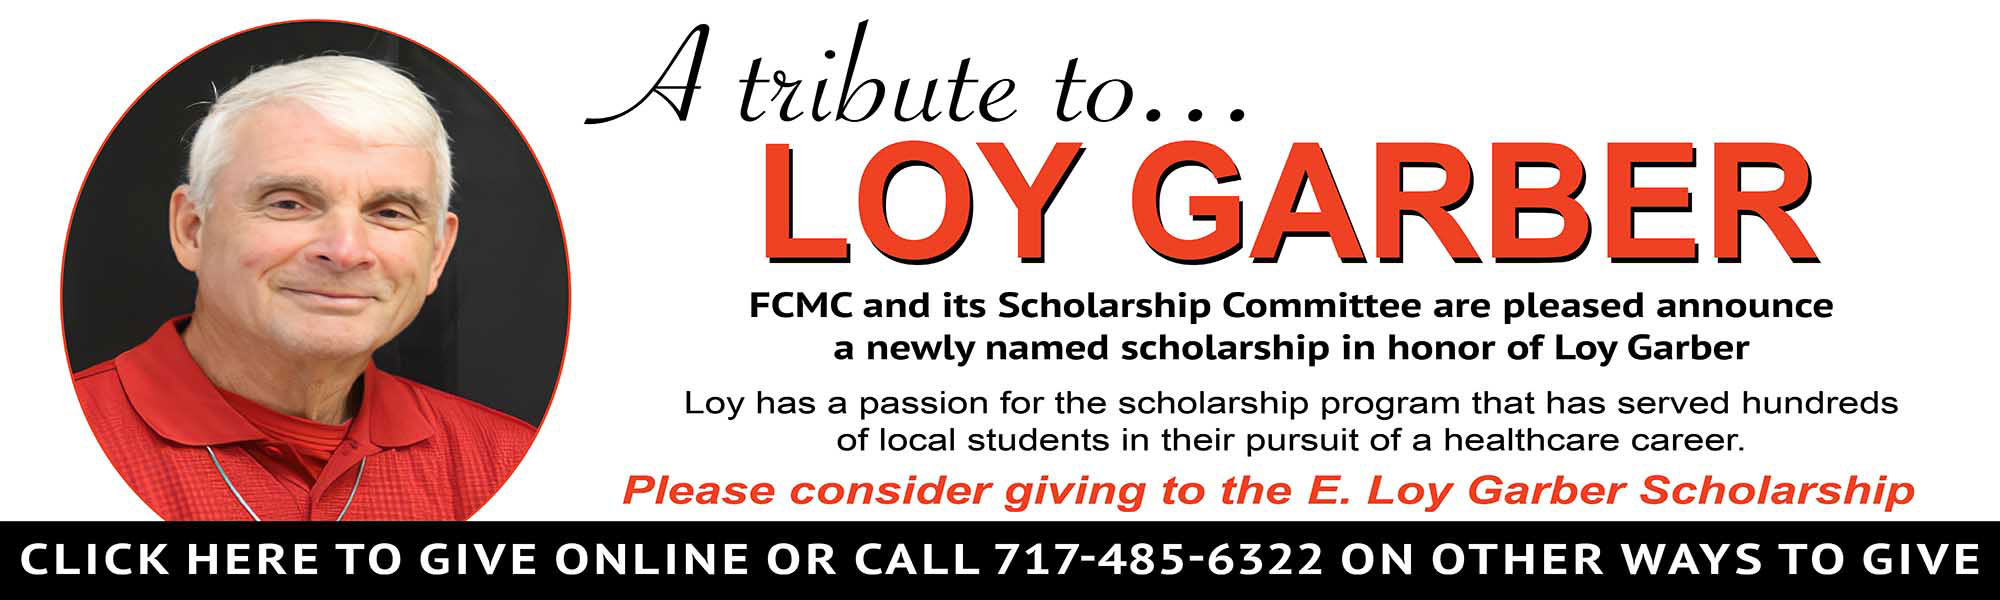 A tribute to Loy Garber

FCMC and its Scholarship Committee are pleased to announce a newly named scholarship in honor of Loy Garber.  

Click Here to Give online or call 717-485-6322 on other ways to give.